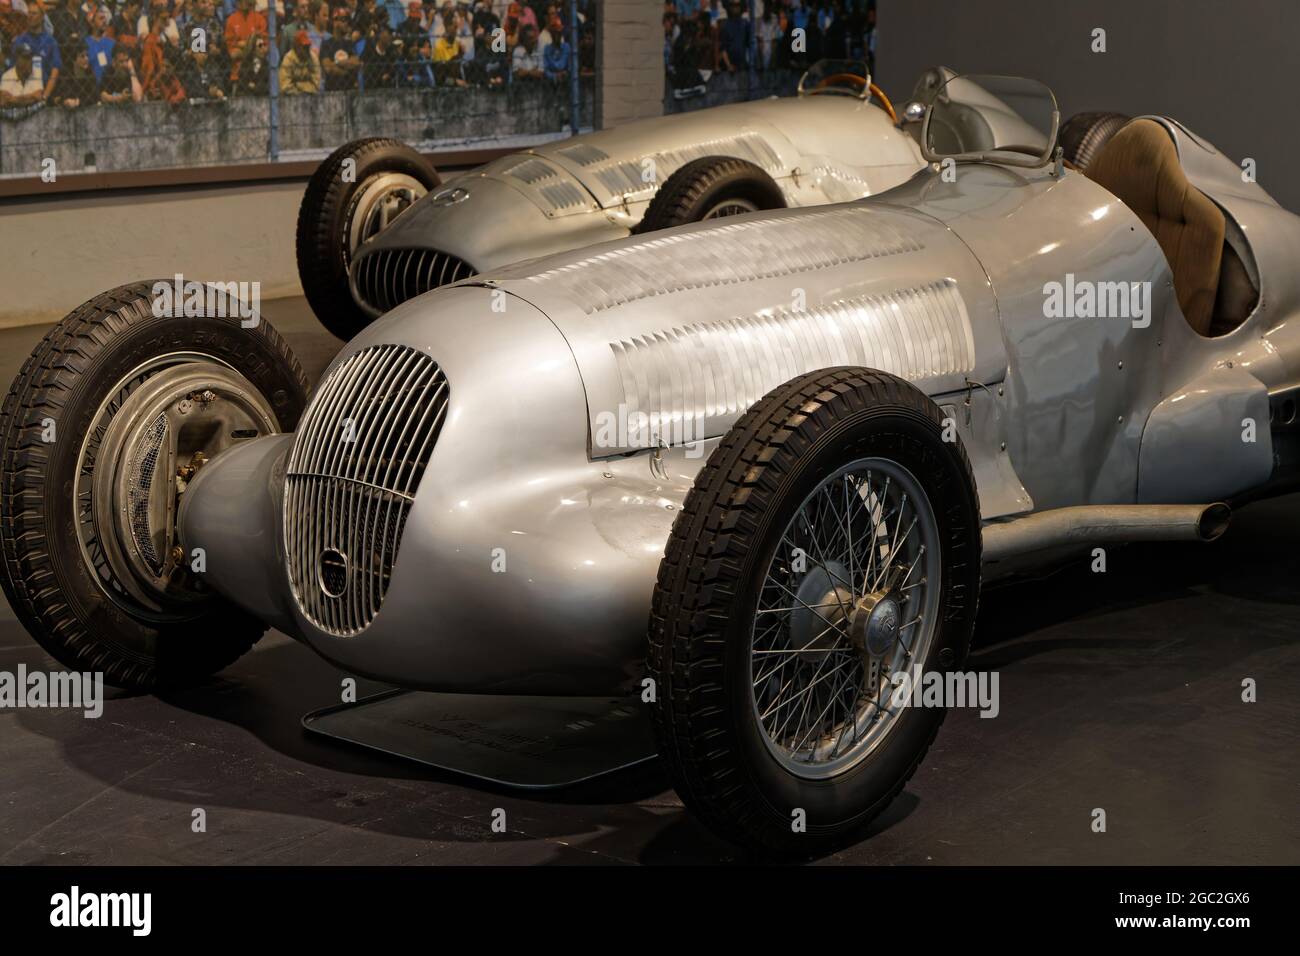 MULHOUSE, FRANCE, June 28, 2021 : Mercedes racing car. The Cité de l'automobile or Schlumpf Collection houses the world’s largest collection of cars w Stock Photo